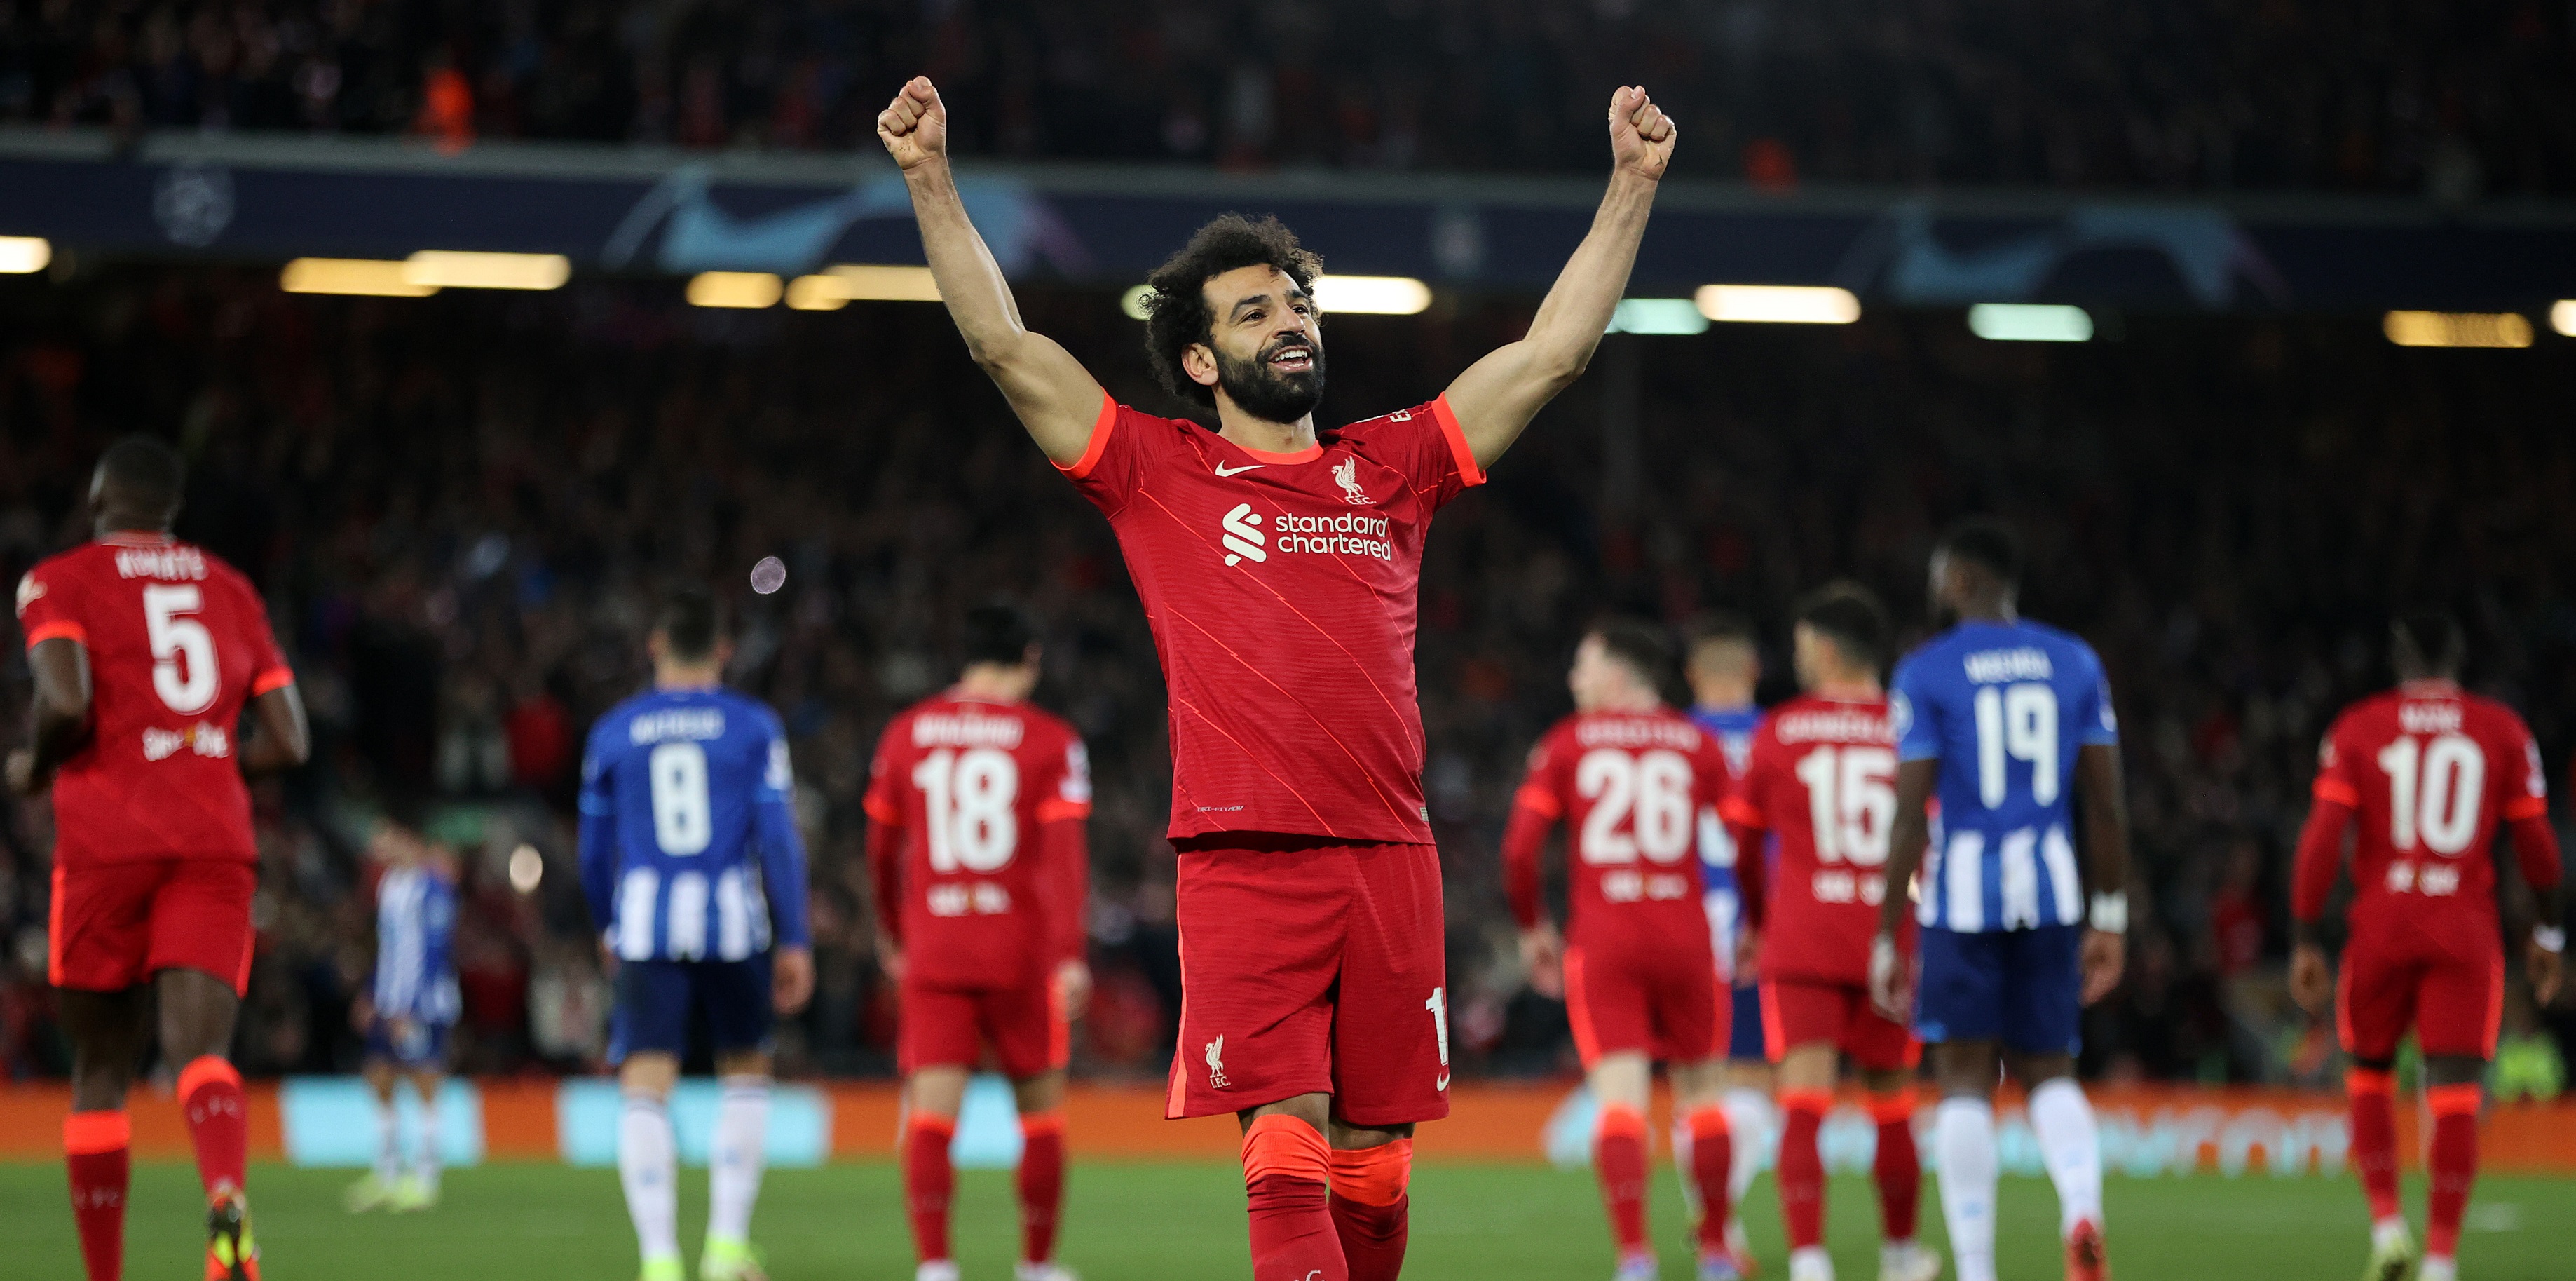 Mo Salah sets his sights on major Liverpool goal he wants to achieve with Reds this season